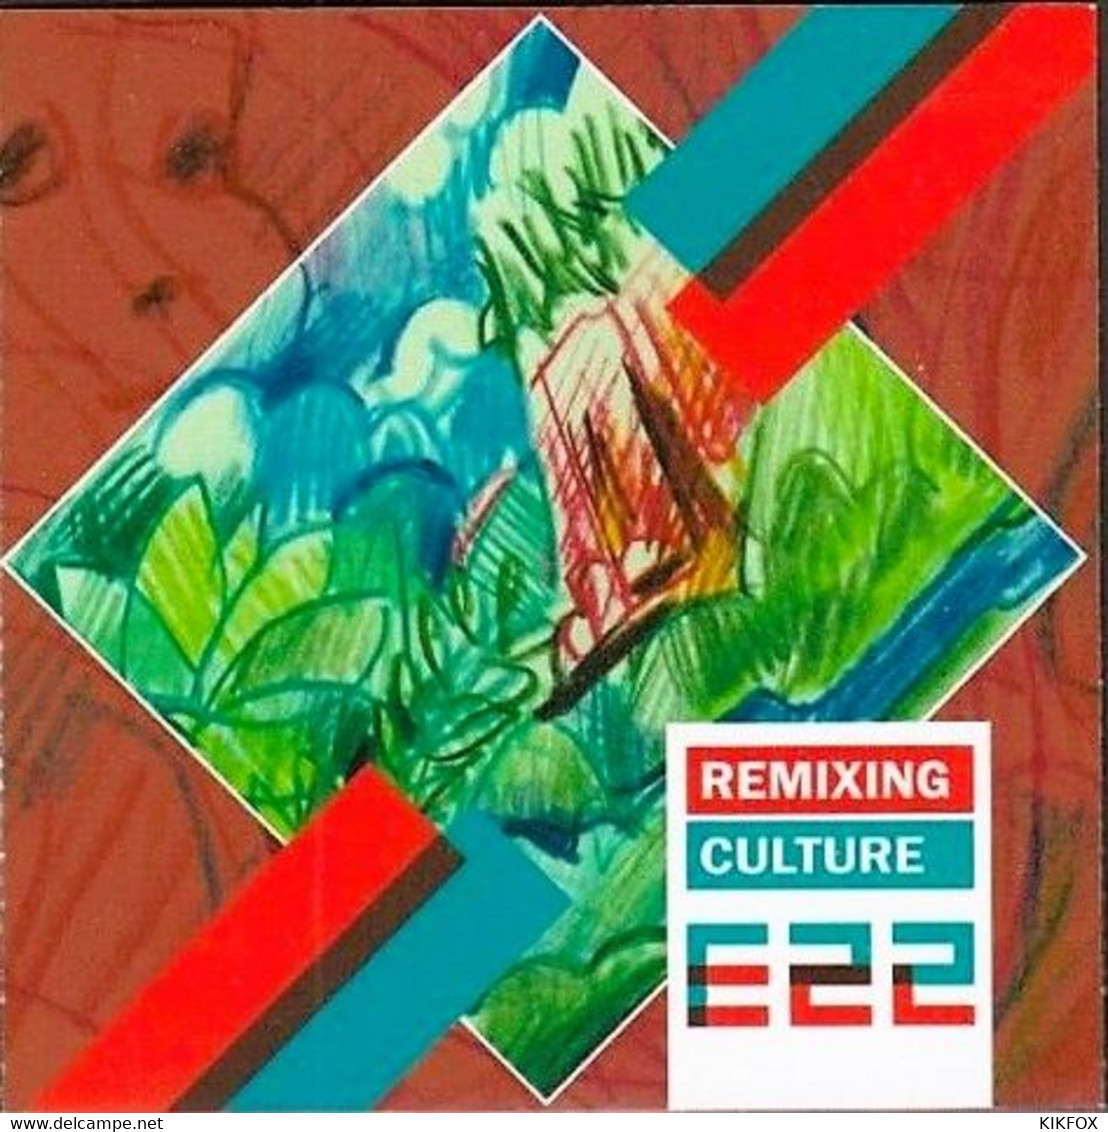 Luxembourg 2022  MH ,CARNET MI 2291 - 2295, Remixing Culture E22- Stamp Booklet L50g  , POSTFRISCH, NEUF - Booklets